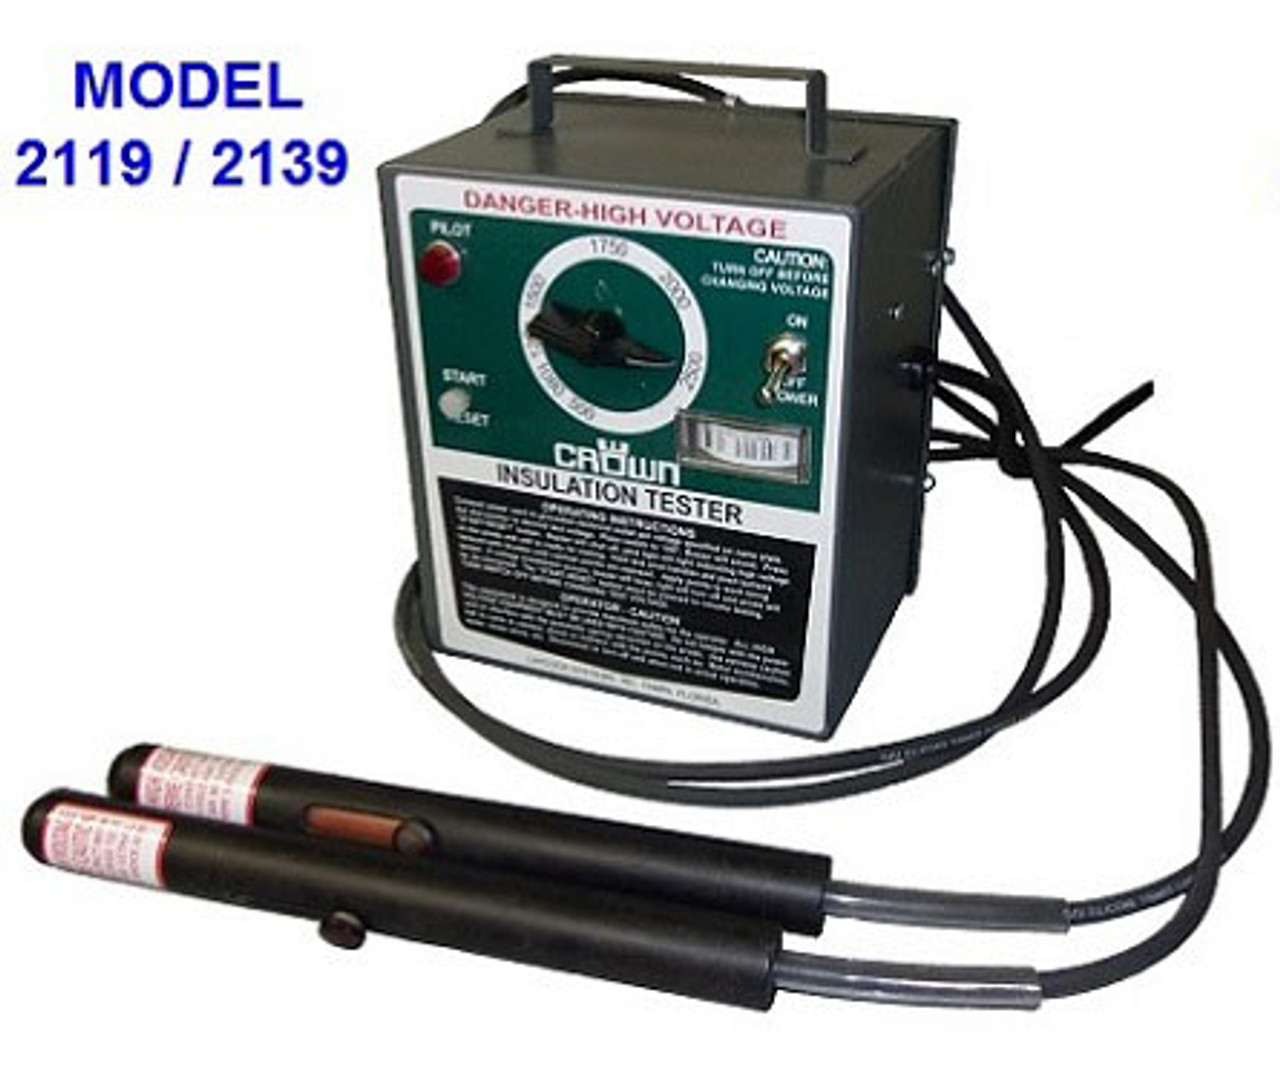 HIPOT Insulation Testers  115v, 50-60 Hertz, 7 Position Voltage Selection With Buzzer, Automatic Breakdown Circuit , And Manual Reset Feature, Also Features A Voltage Indication Meter.